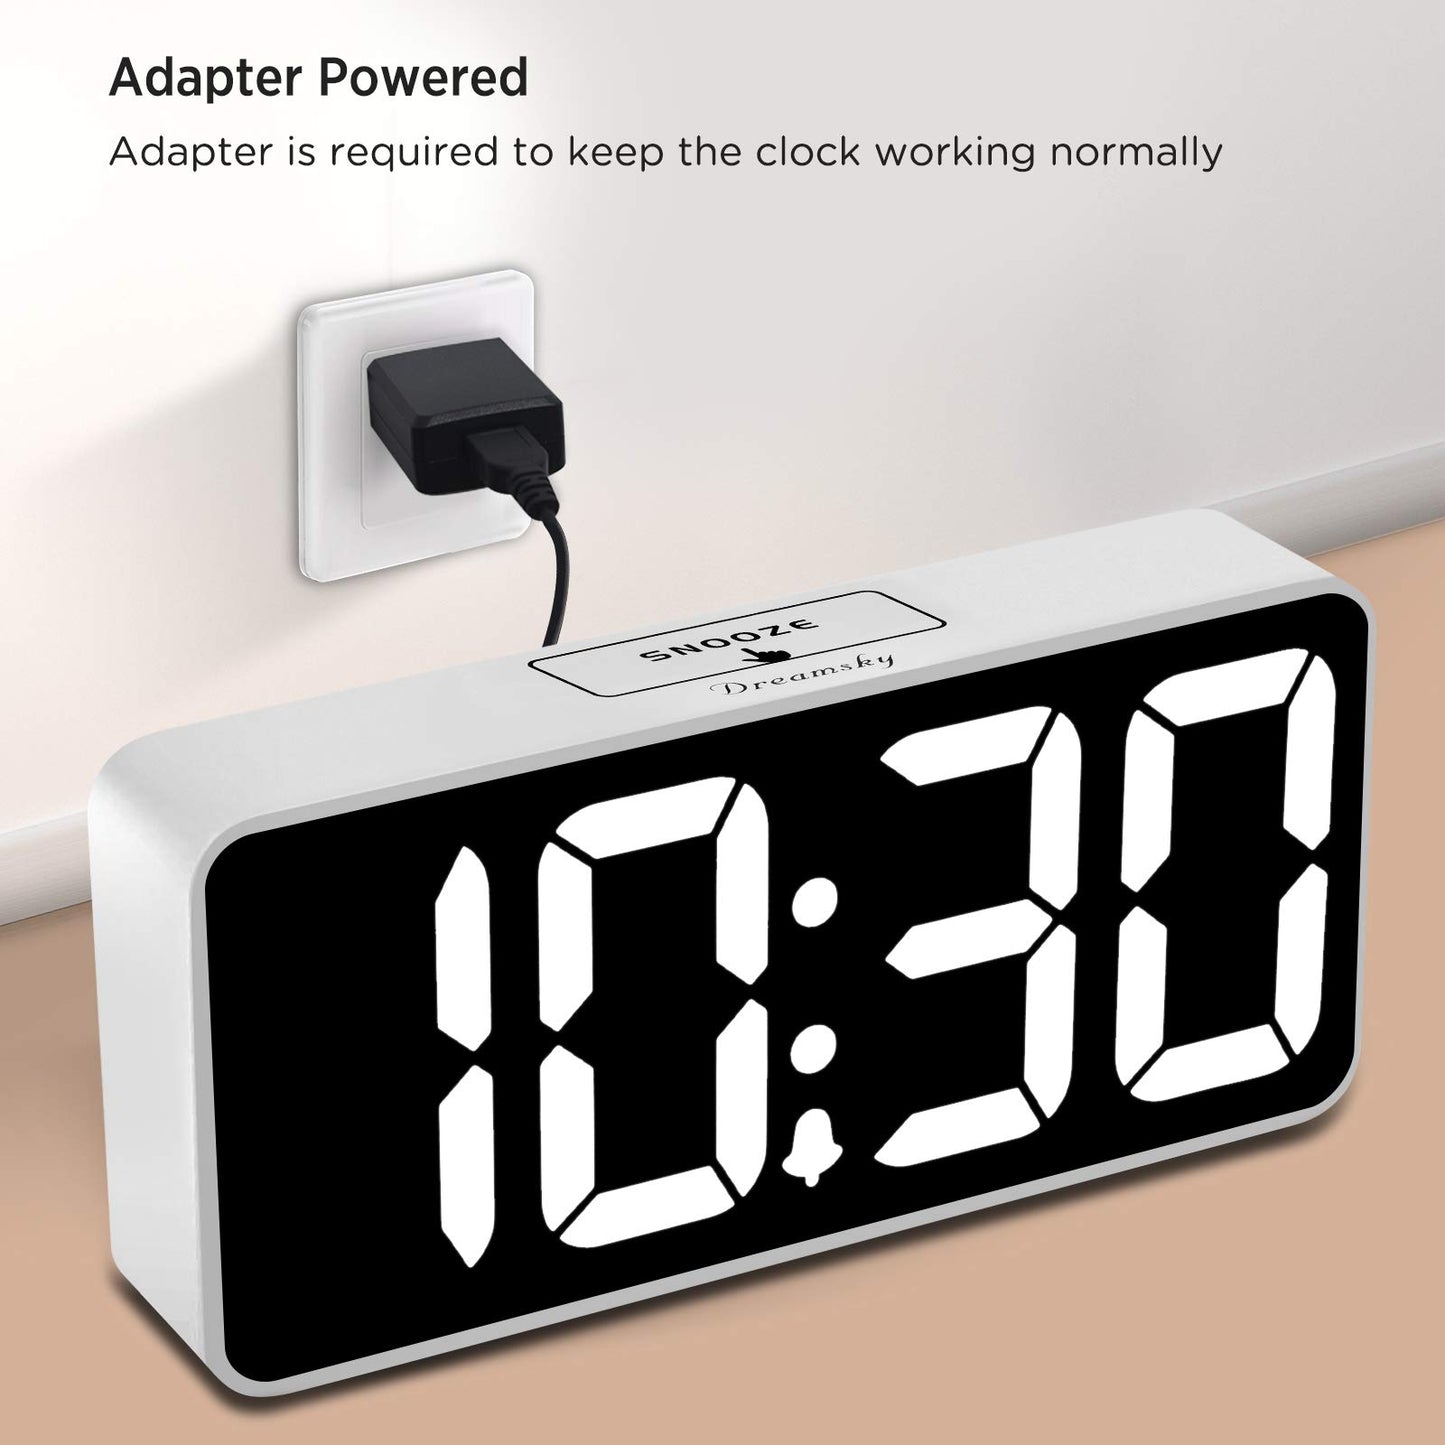 DreamSky Large Digital Alarm Clock Big Numbers for Seniors & Visually Impaired, 9 Inches Electric Clocks for Bedroom, Jumbo Display Fully Dimmable Brightness, USB Ports, Adjustable Alarm Volume